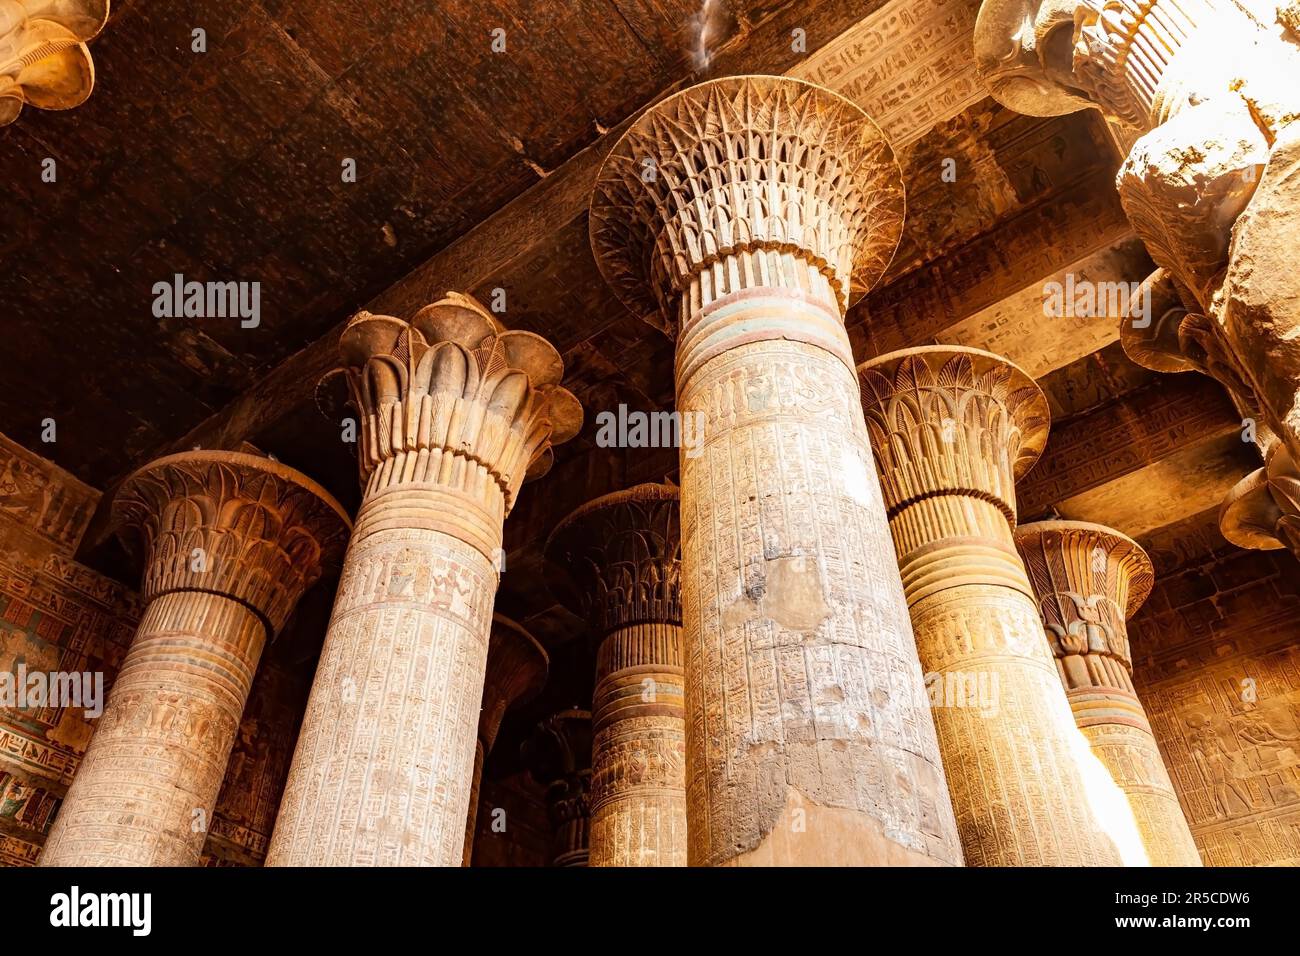 Beautiful decoration at the columns of the Temple of Khnum (the Ram Headed Egyptian God) in Esna, Upper Egypt Stock Photo